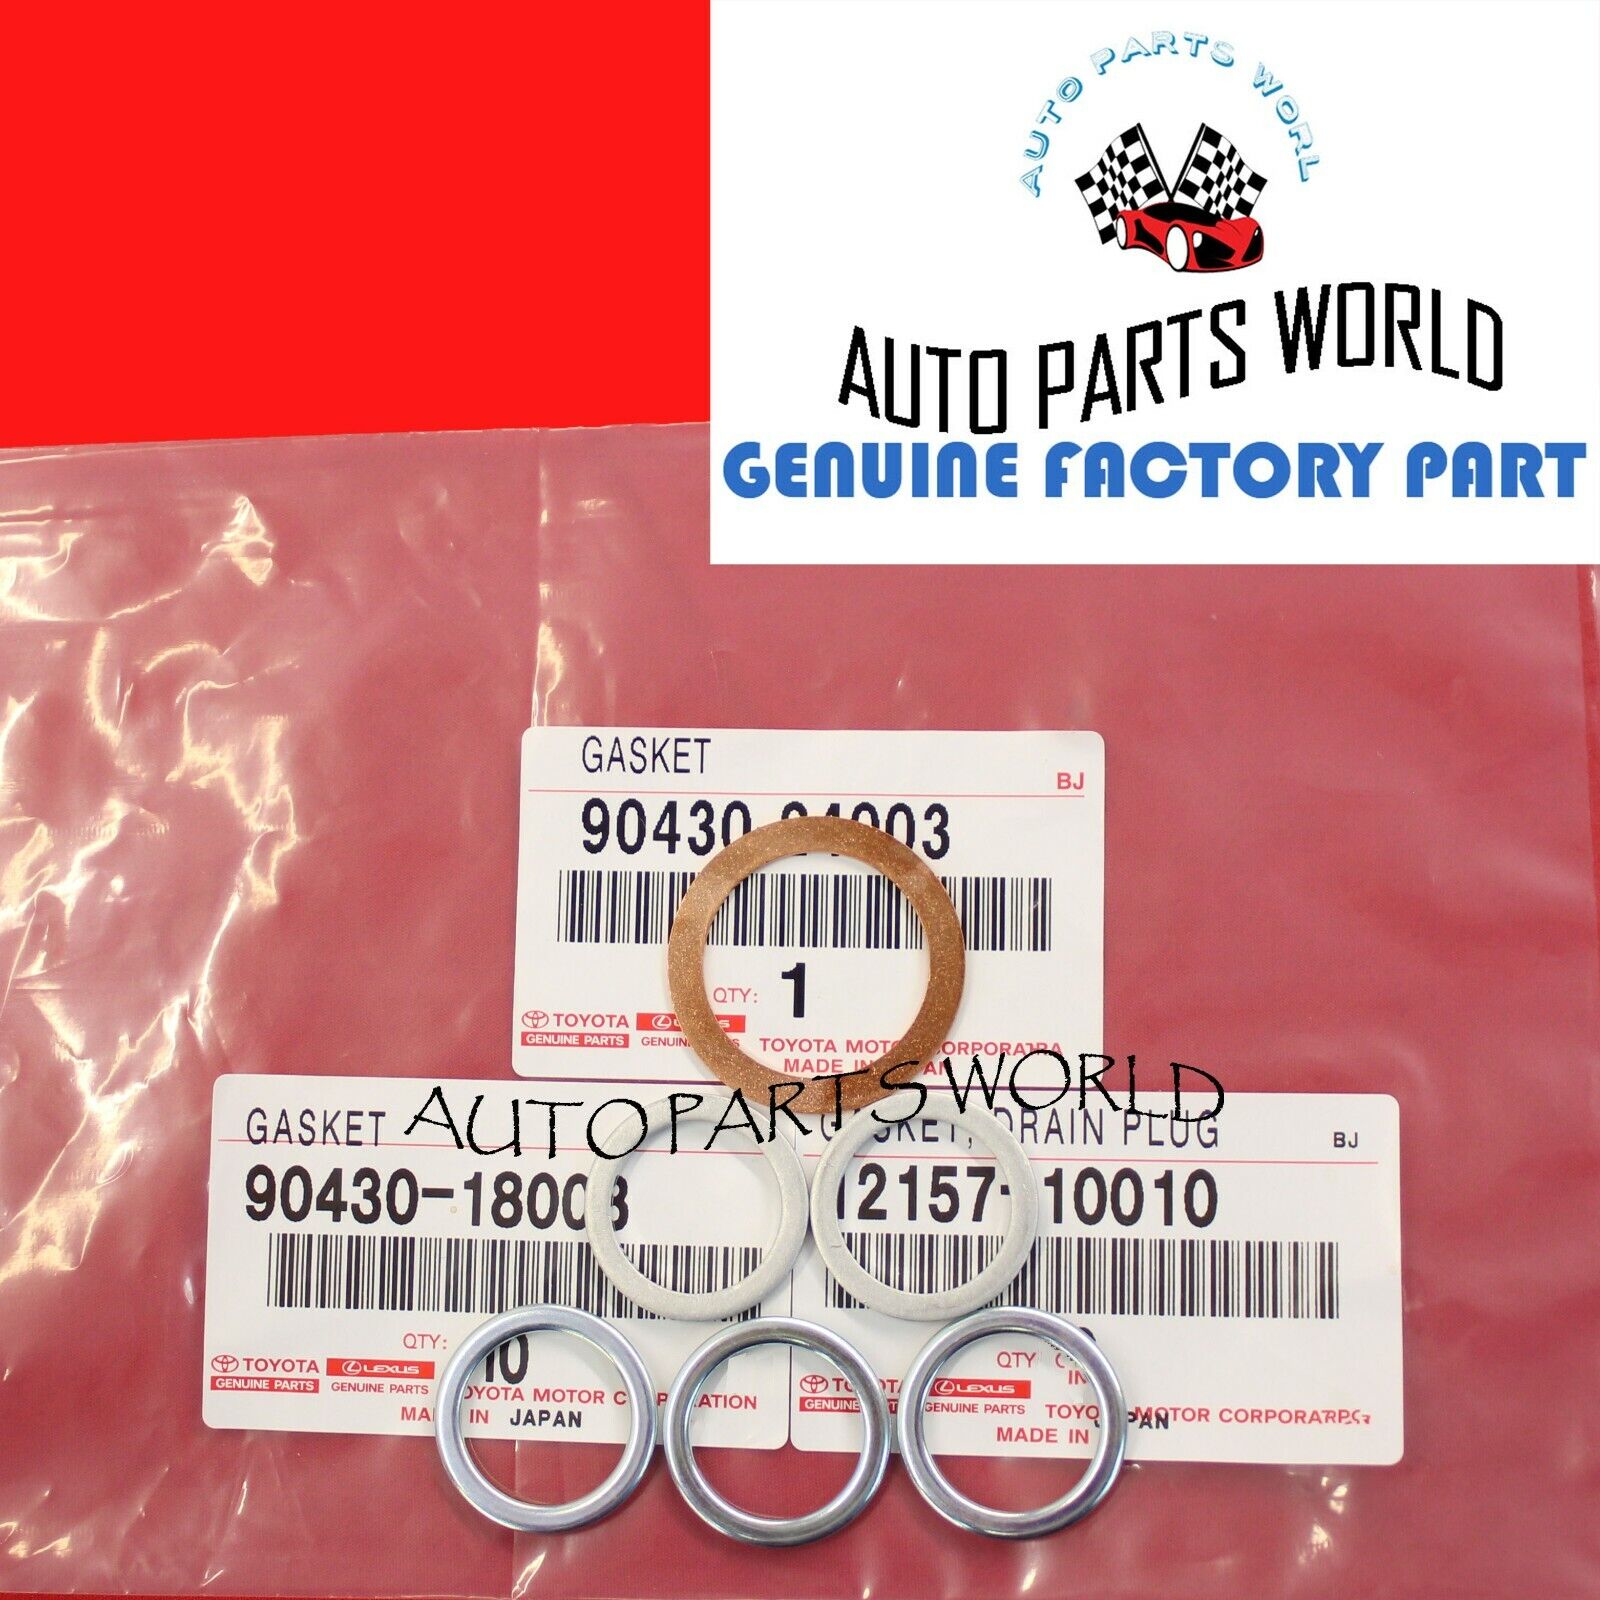 GENUINE TOYOTA GASKET KIT FOR TRANSFER AND DIFFERENTIAL SERVICE 3 TYPE GASKETS